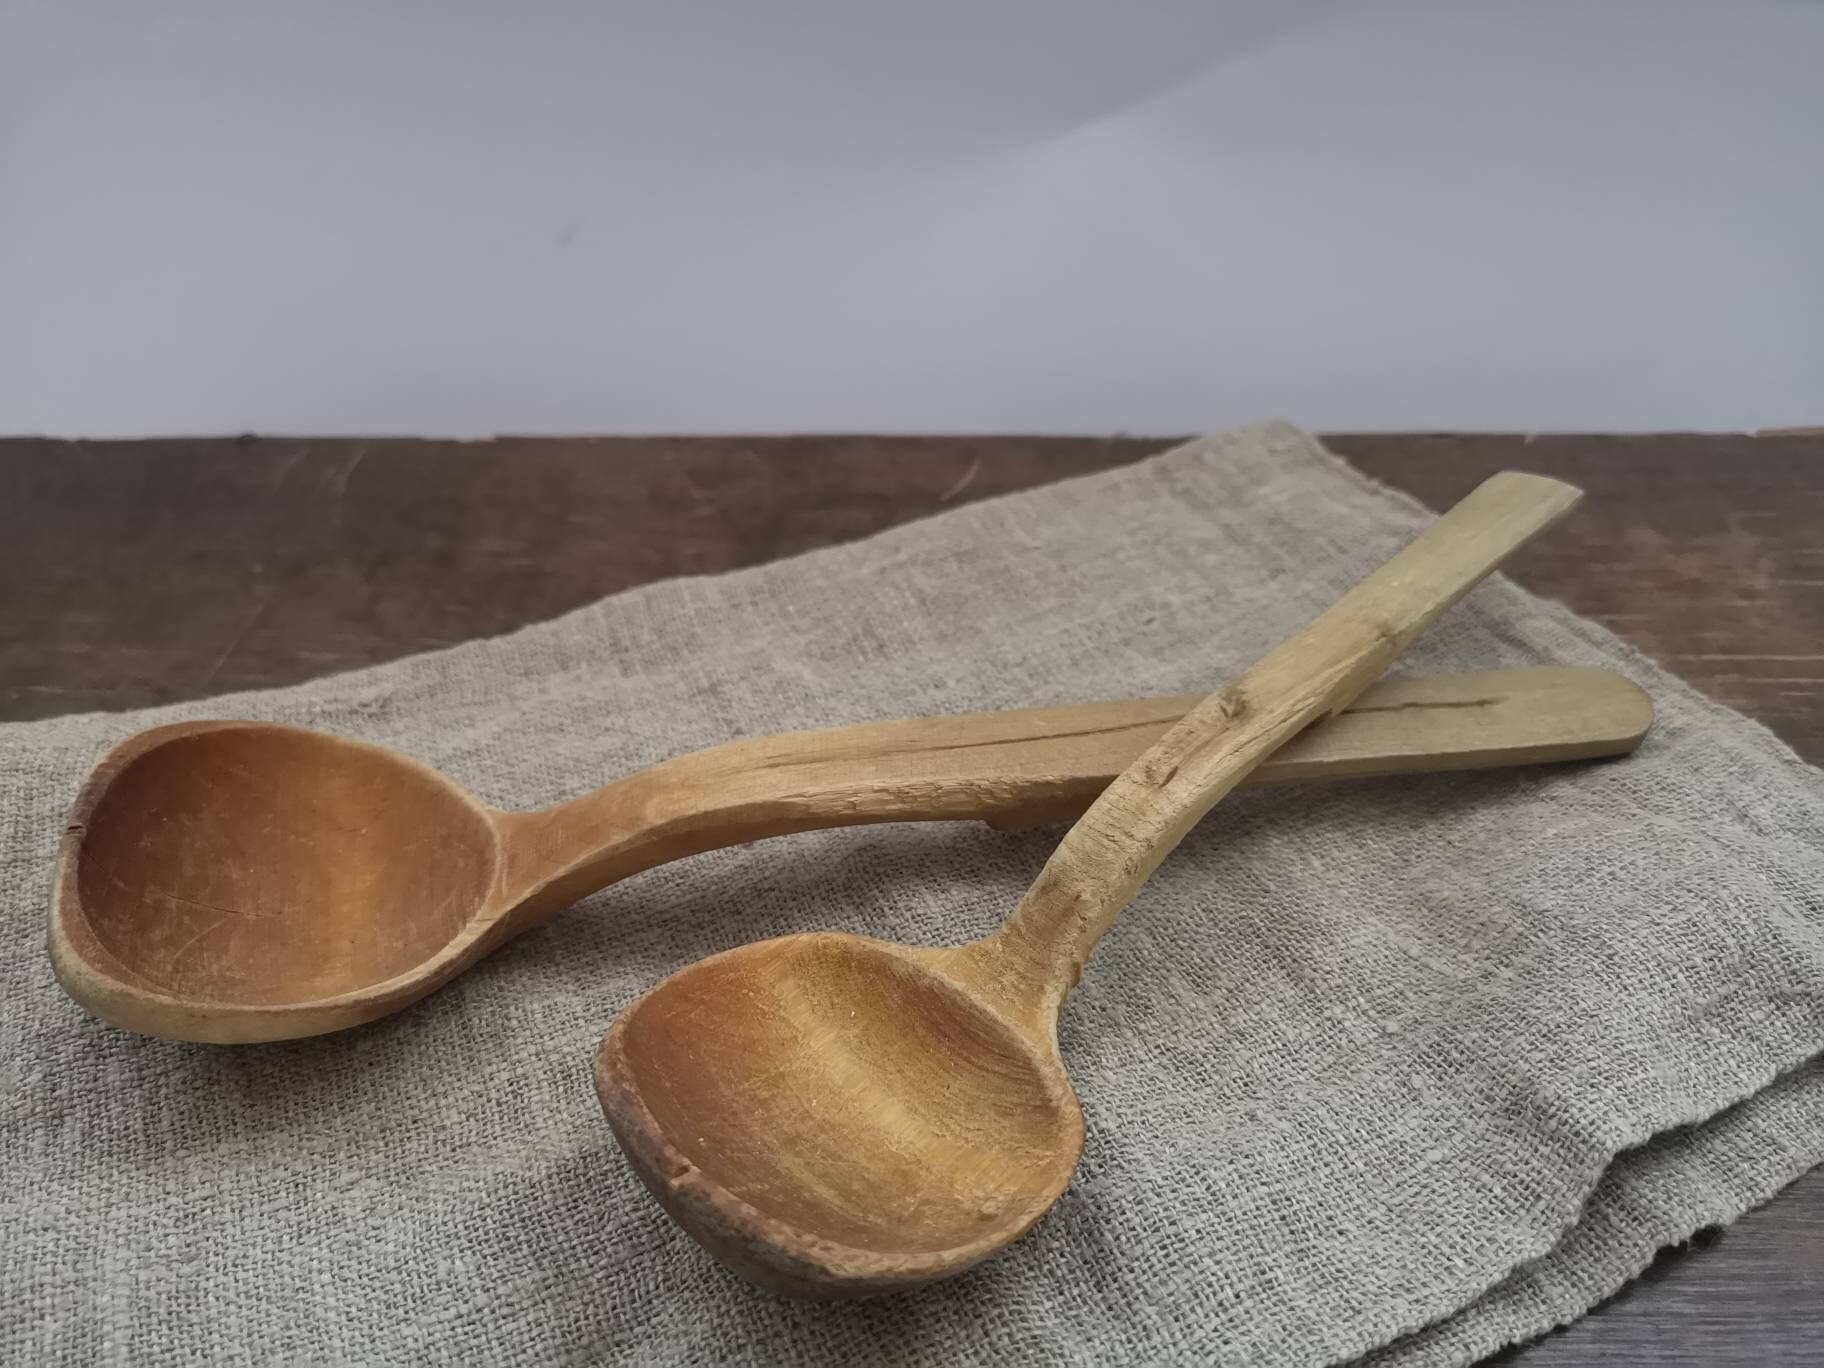 Rustic Kitchen Decor - Crock Pot Wooden Spoon - Personalized Gallery